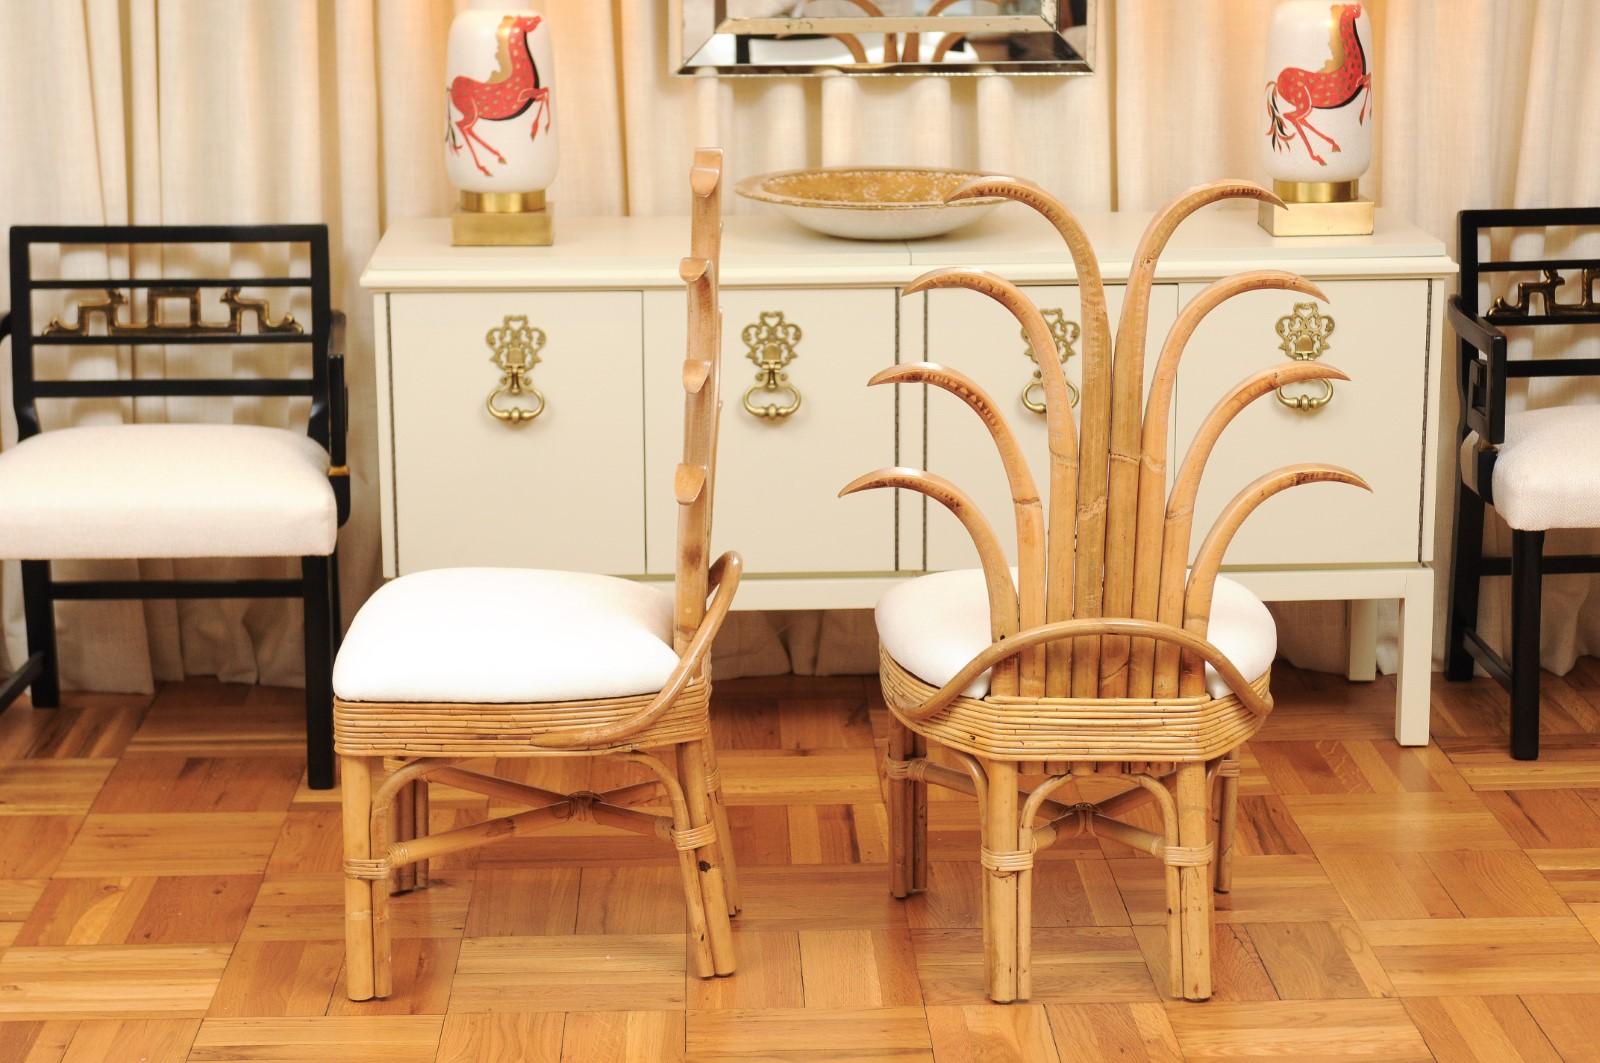 Exquisite Set of 8 Rattan and Cane Palm Frond Dining Chairs, circa 1950 For Sale 8